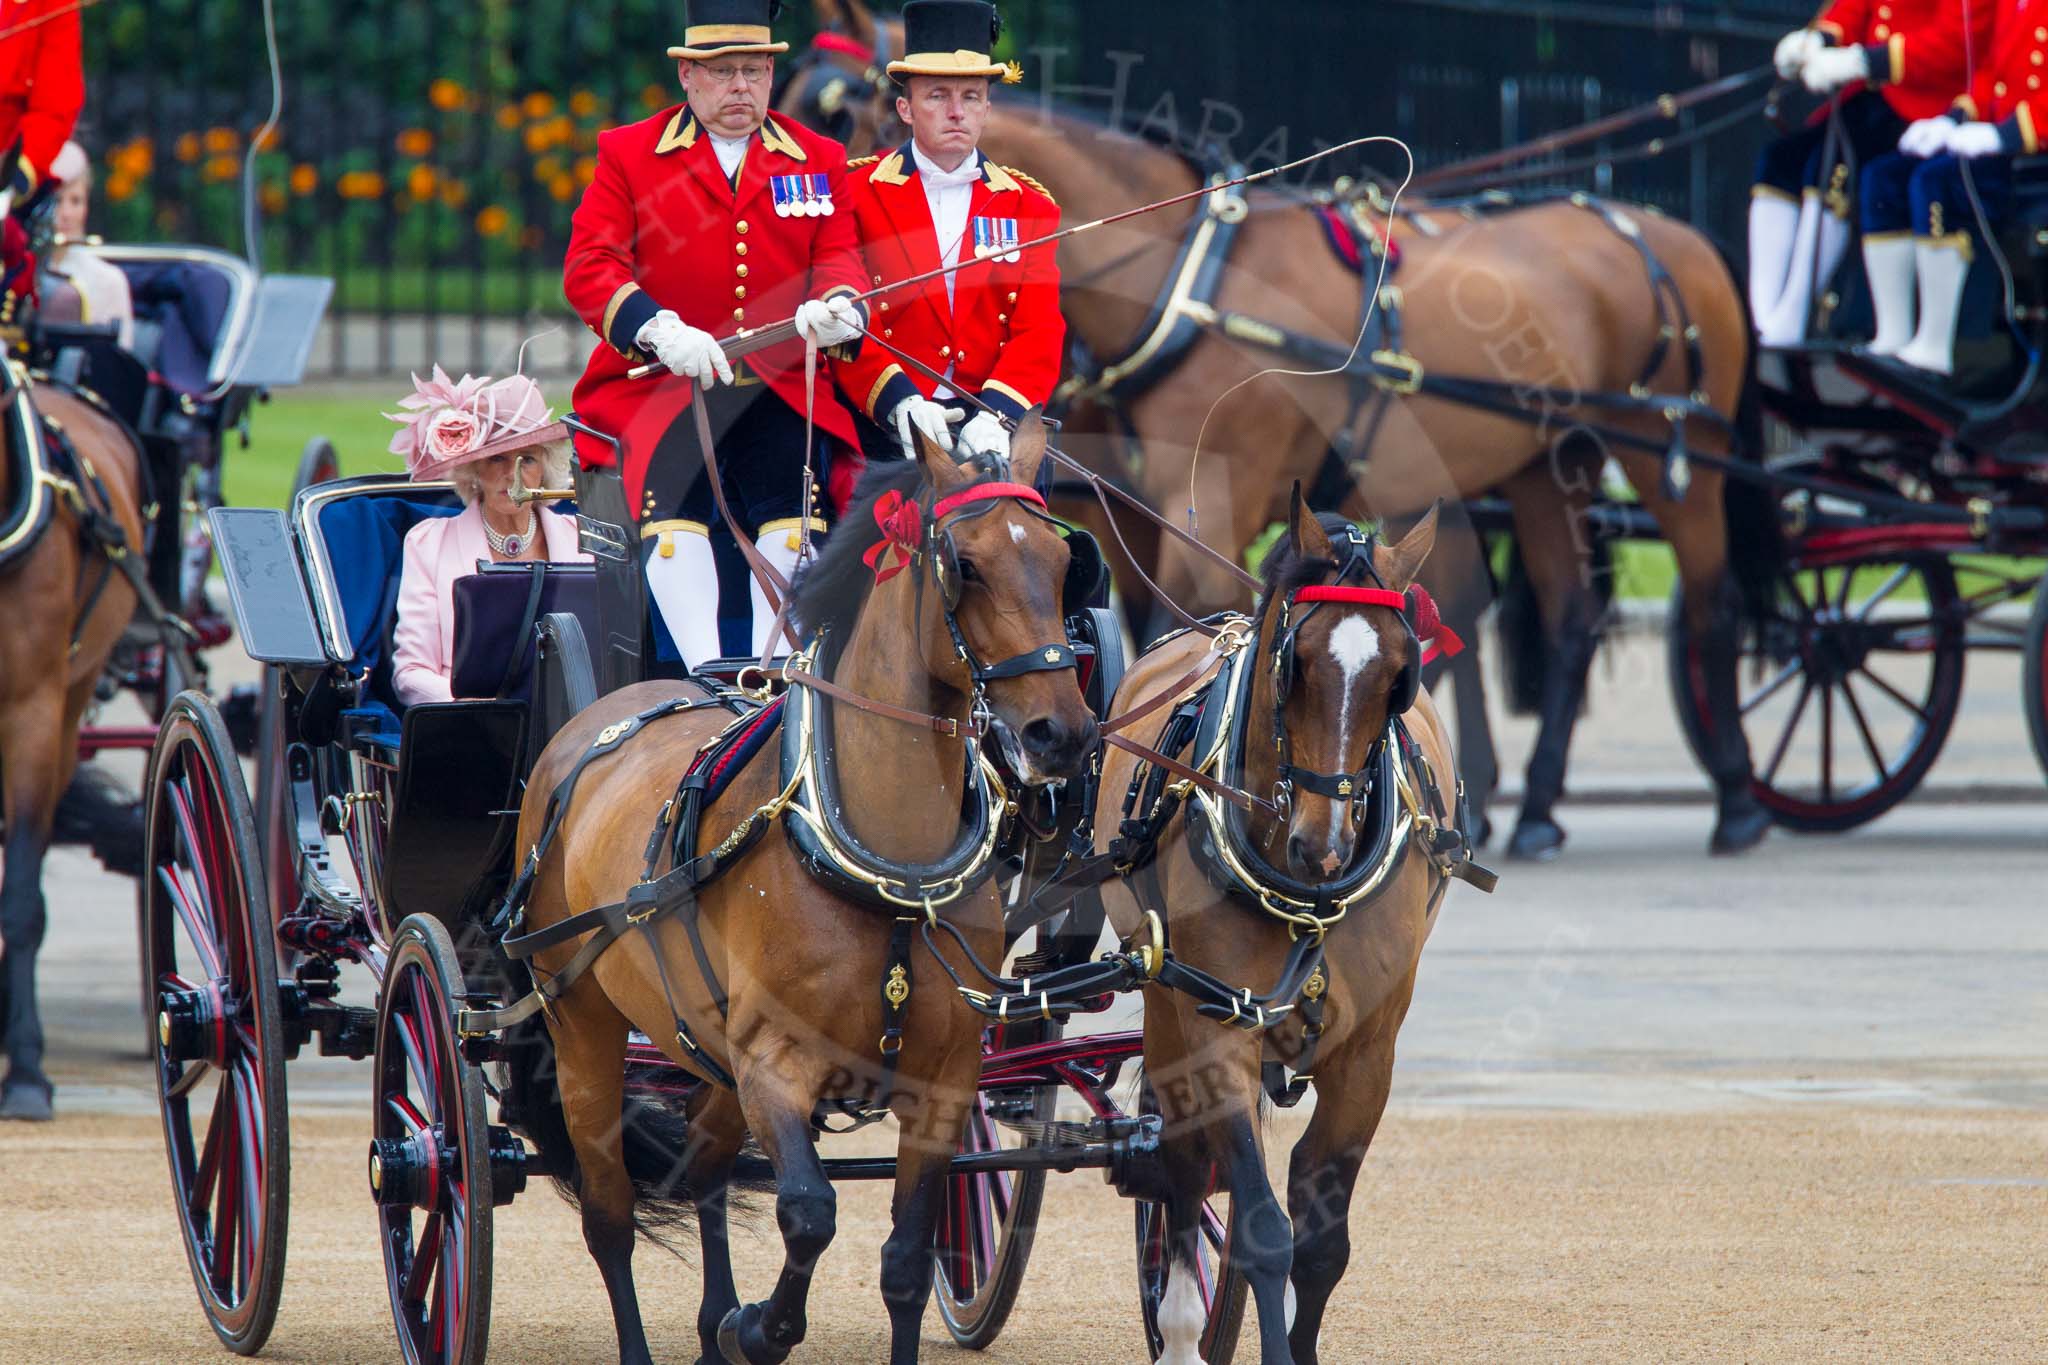 Trooping the Colour 2014.
Horse Guards Parade, Westminster,
London SW1A,

United Kingdom,
on 14 June 2014 at 10:49, image #271